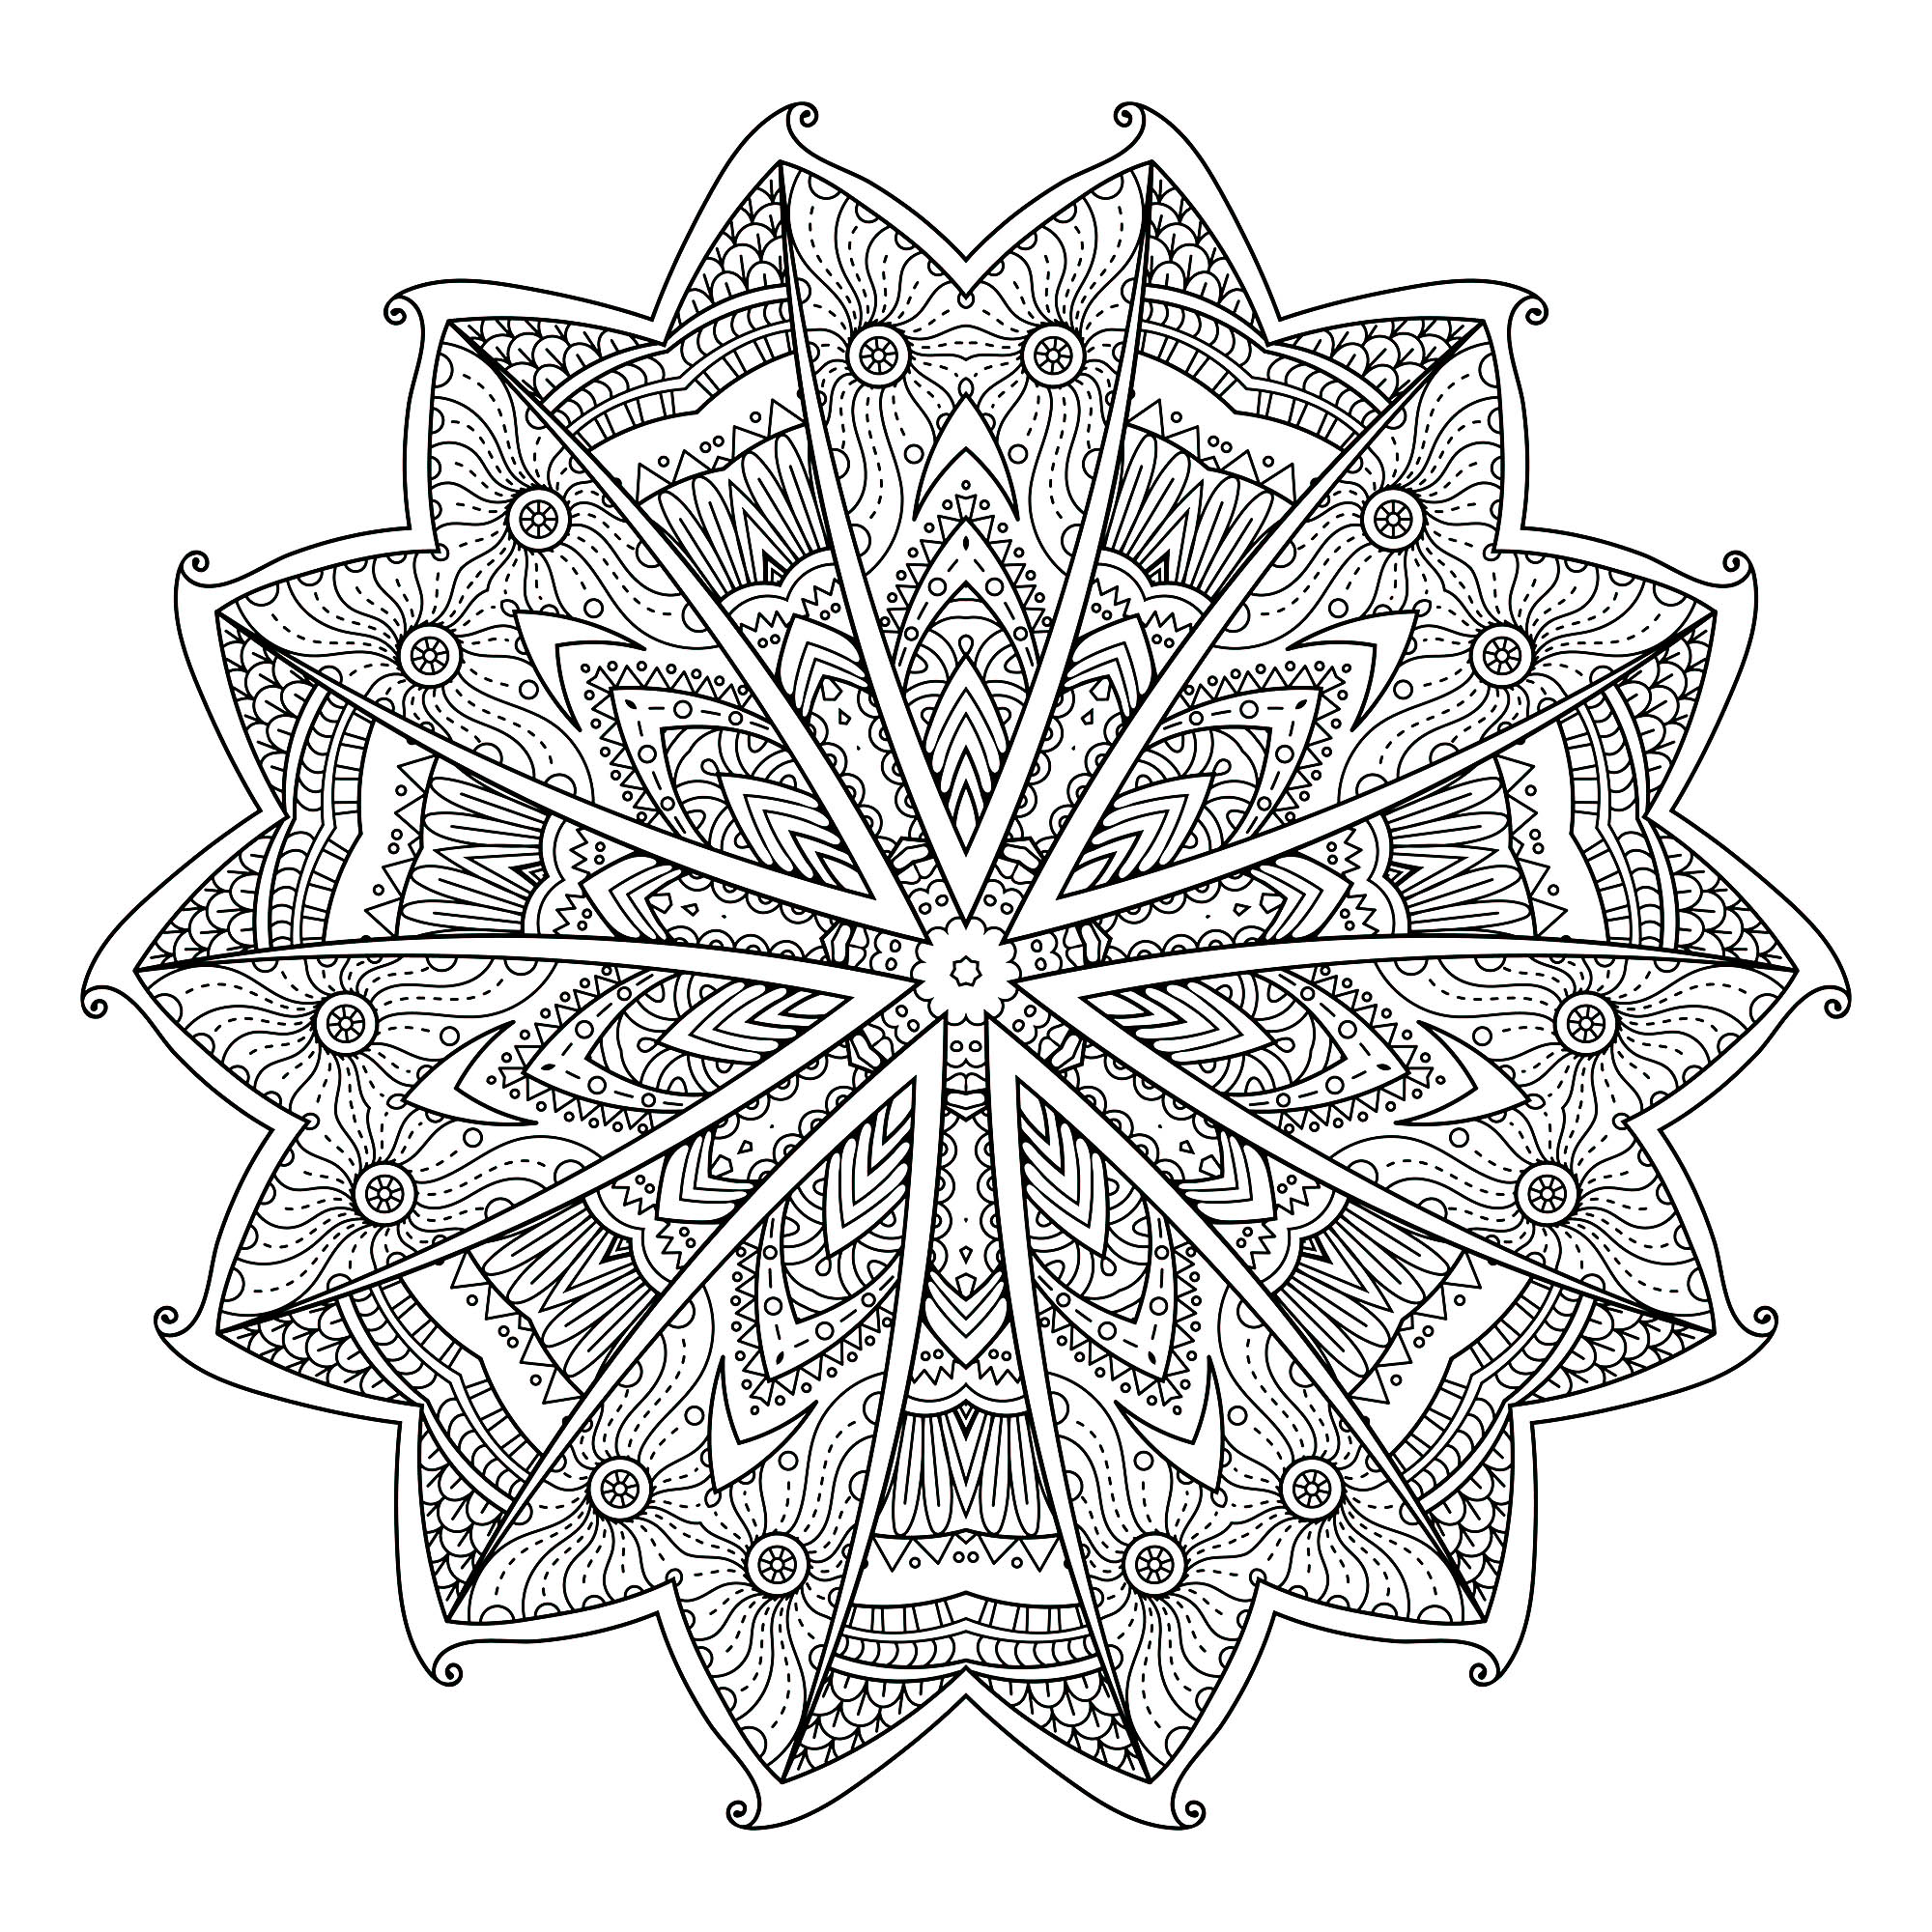 Abstract decorative background - Mandalas Adult Coloring Pages